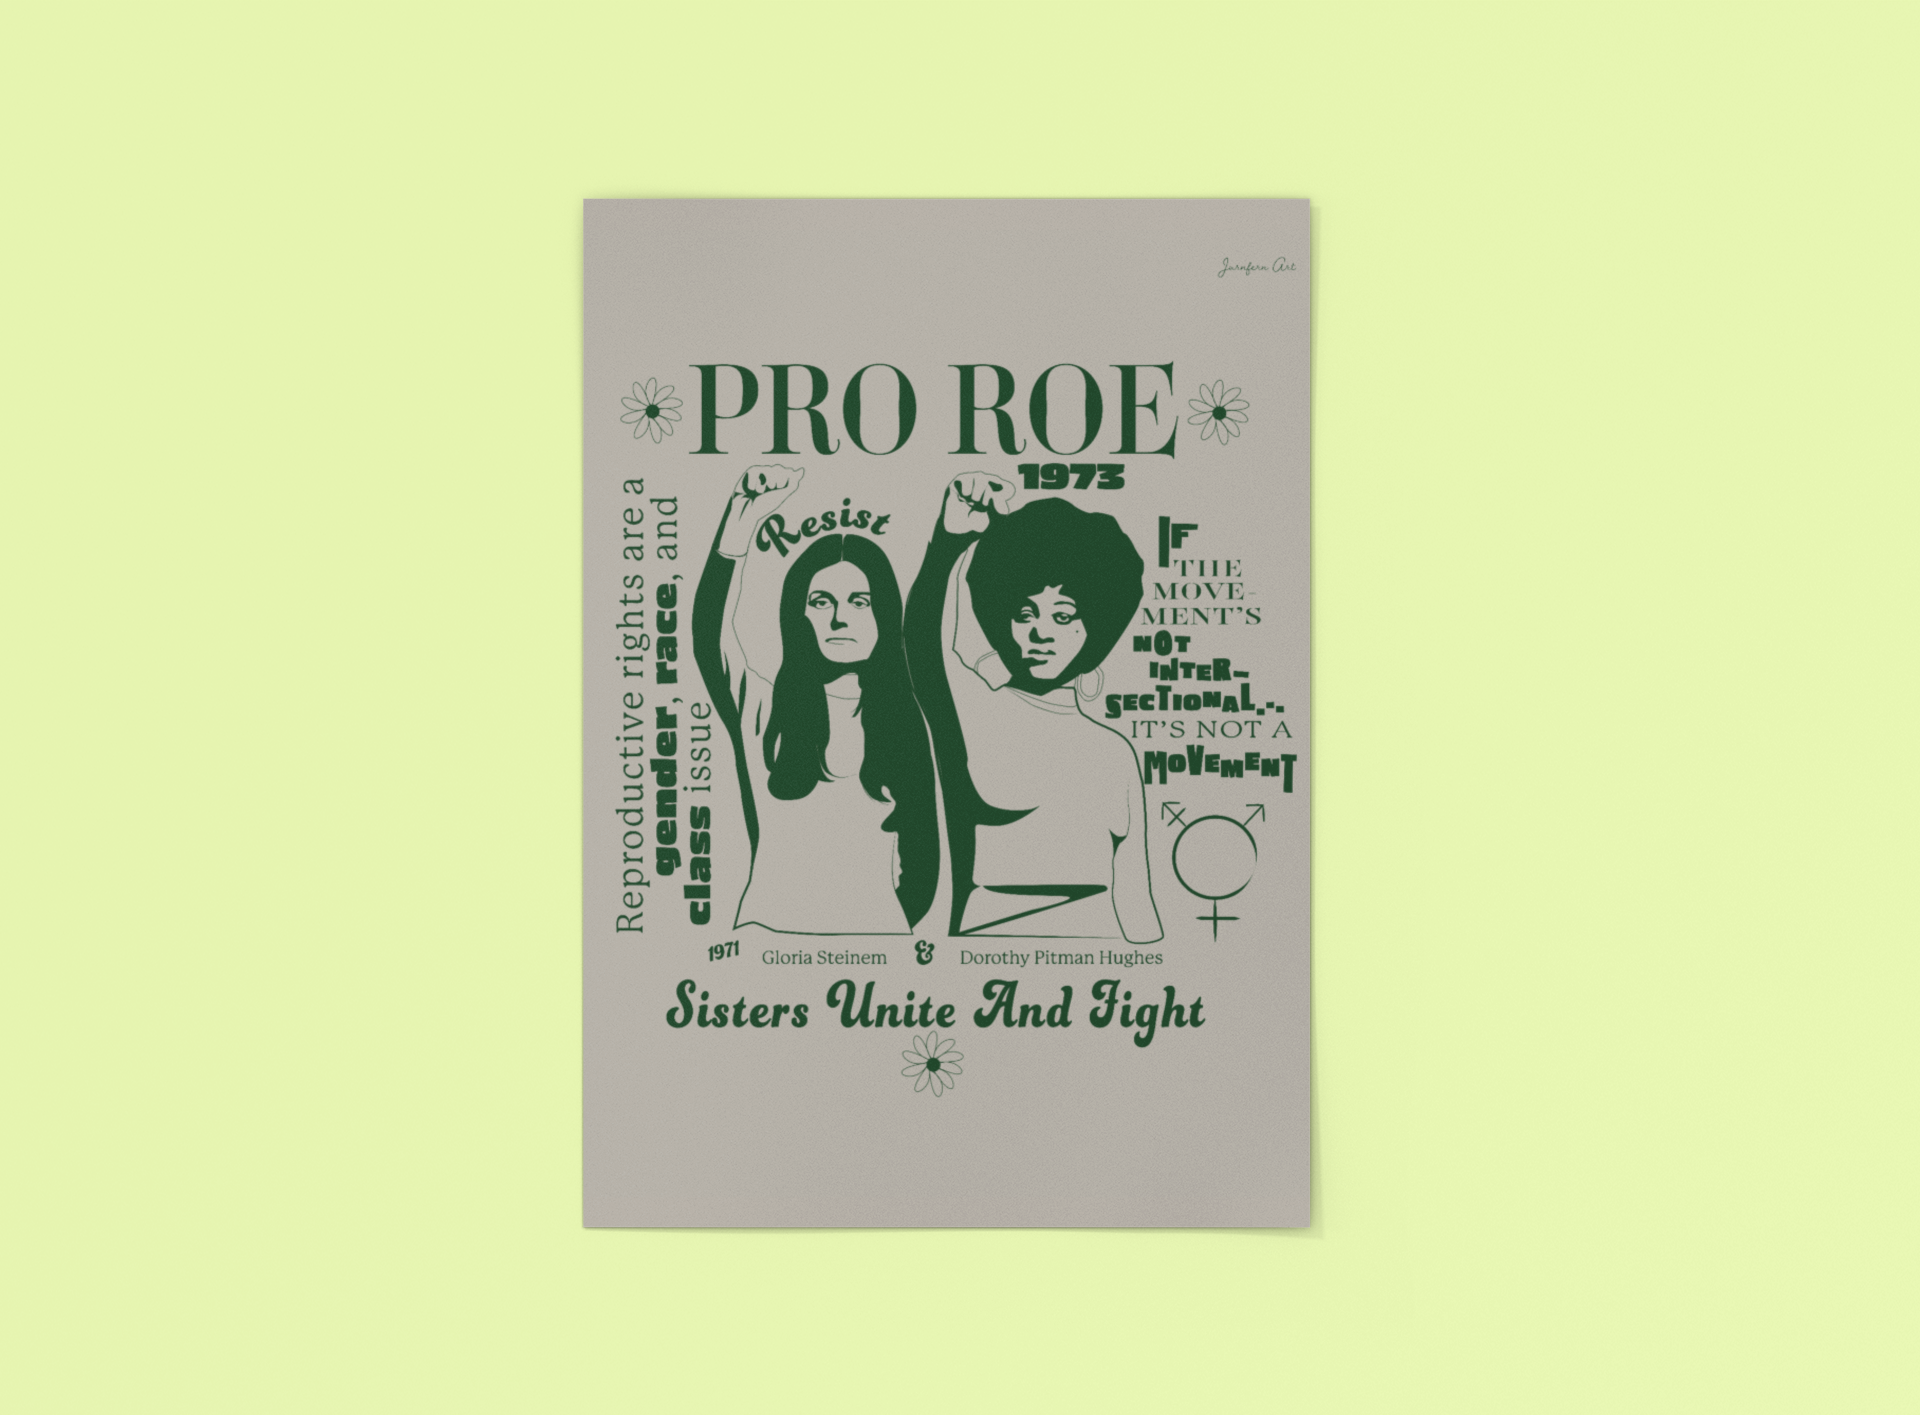 A beige 18 by 24 inch poster with an illustration on it of activists Gloria Steinem and Dorothy Pitman Hughes and text that reads "PRO ROE 1973"